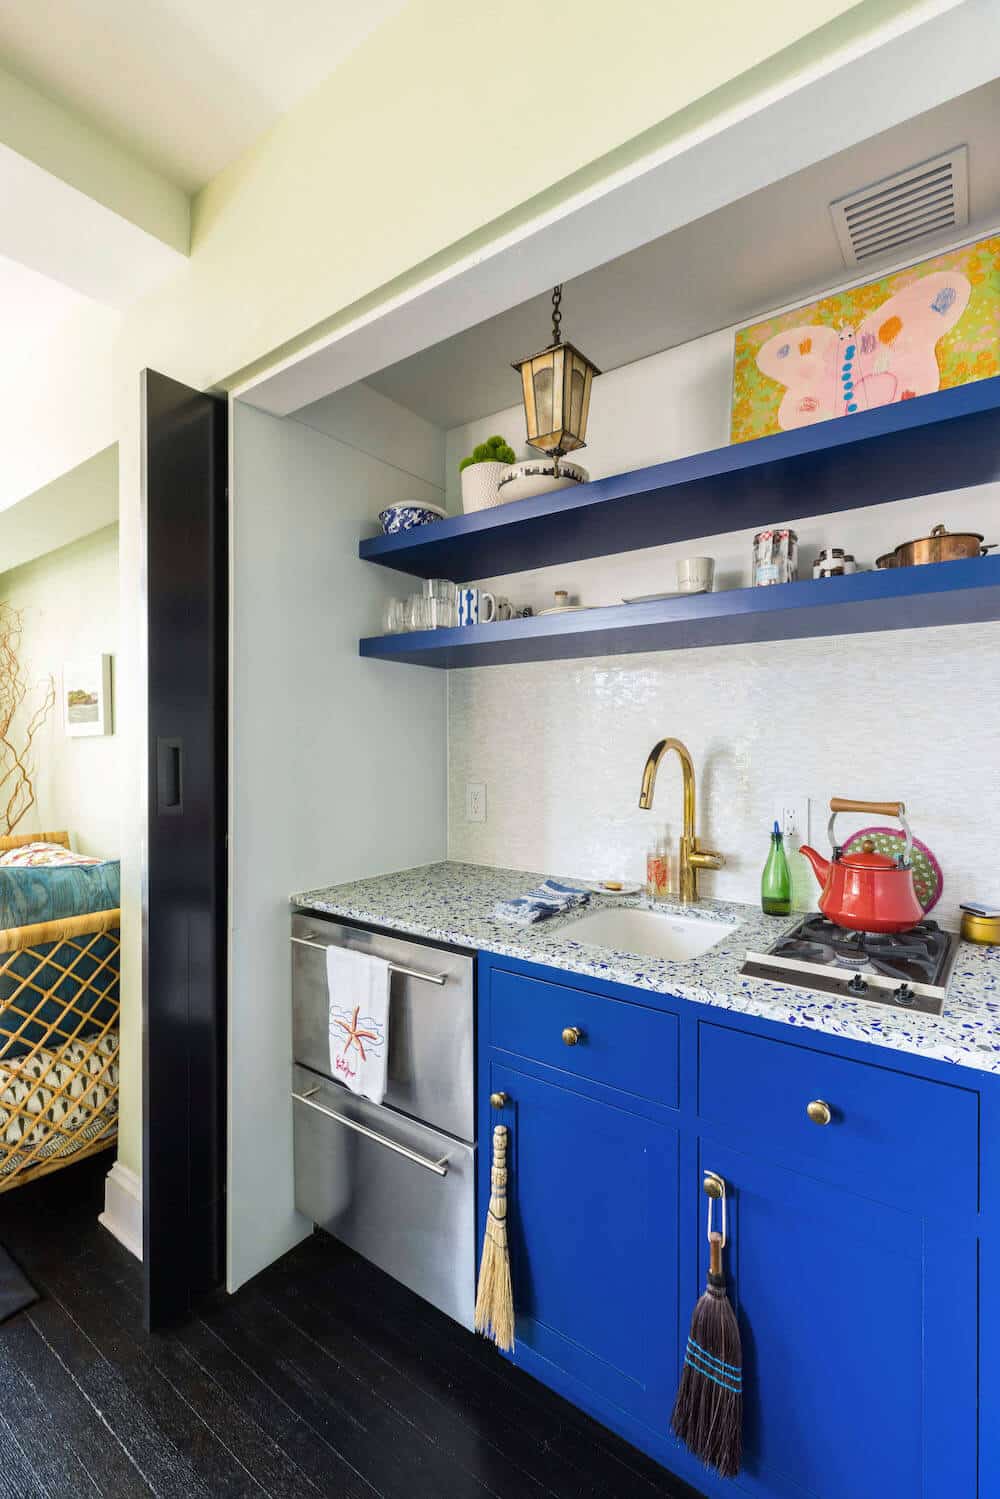 cobalt blue kitchen cabinets with double doors to hide kitchen